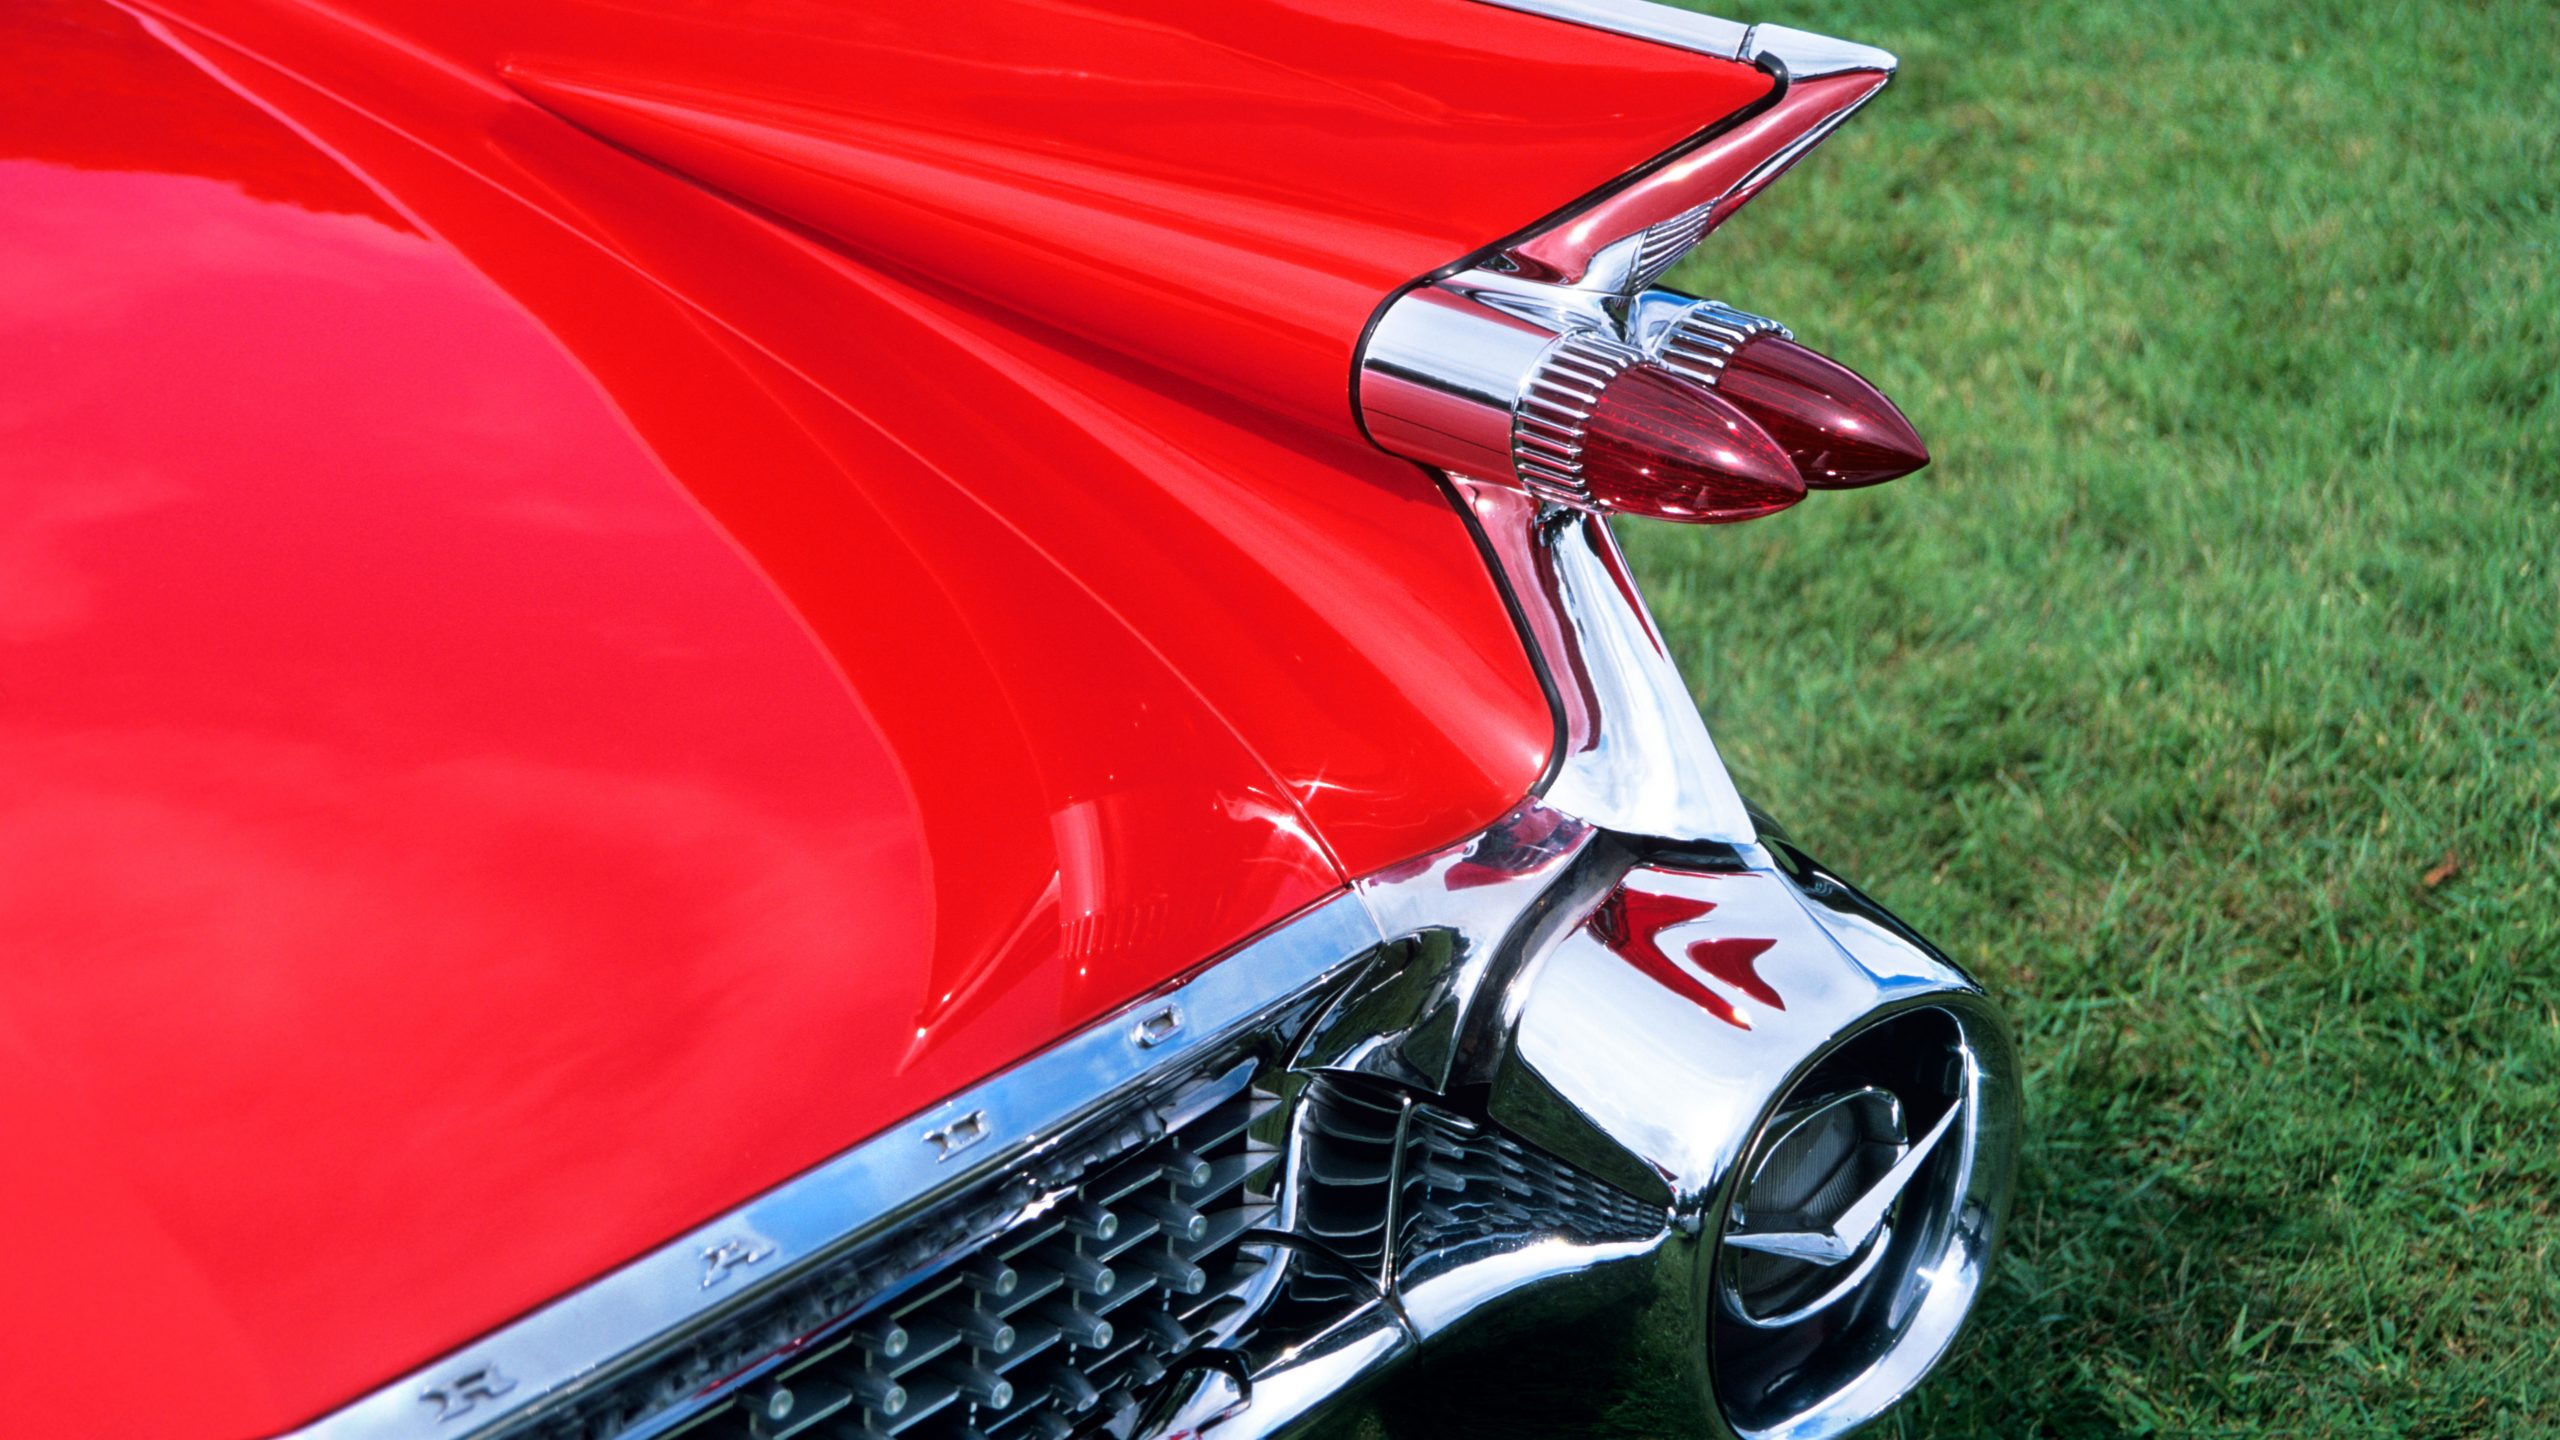 1959 Cadillac tail fin and tail light